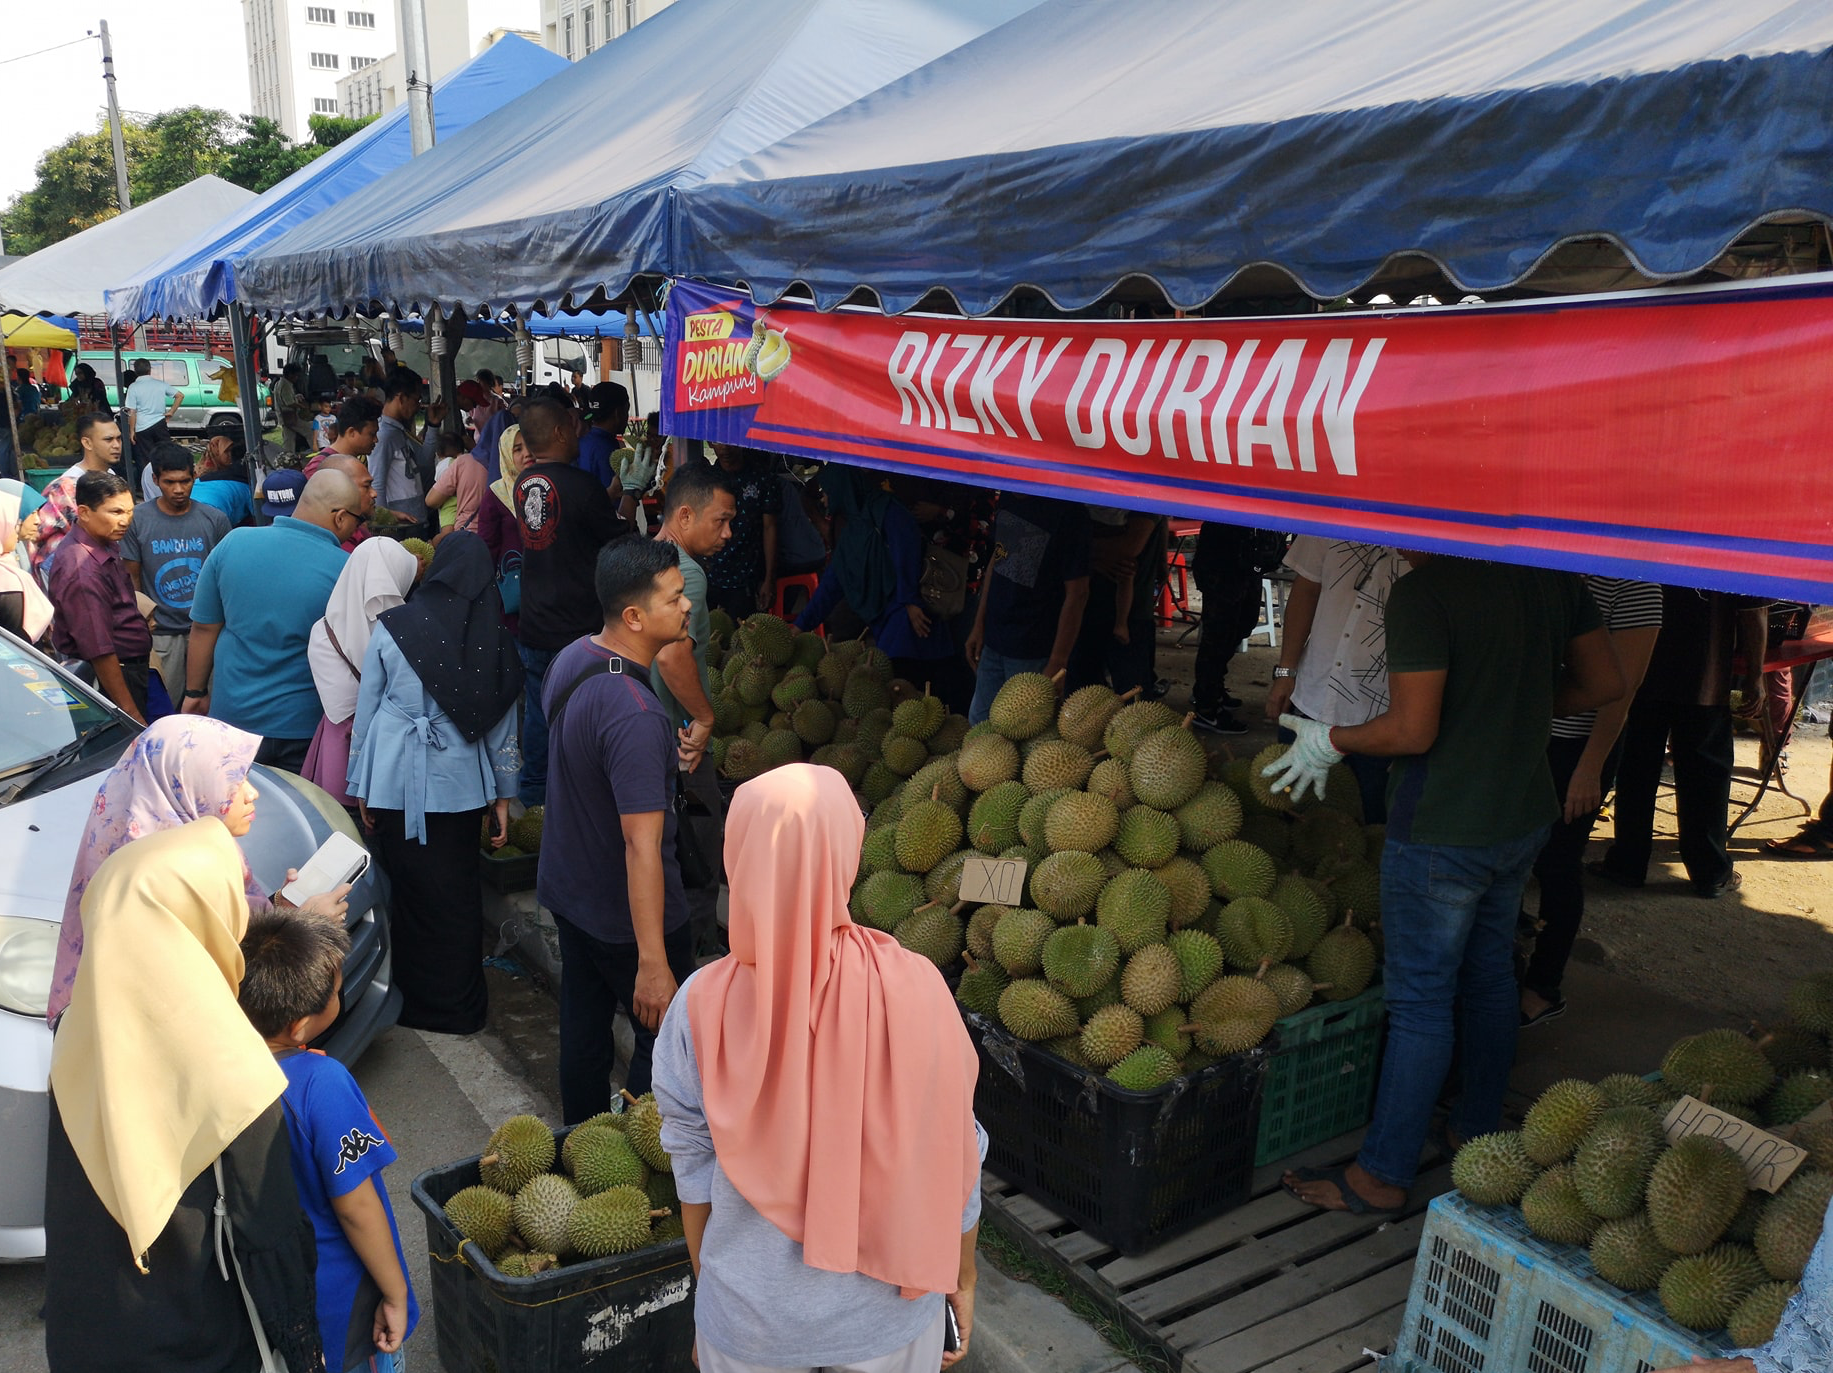 Pregnant women gets free durian from rizky durian